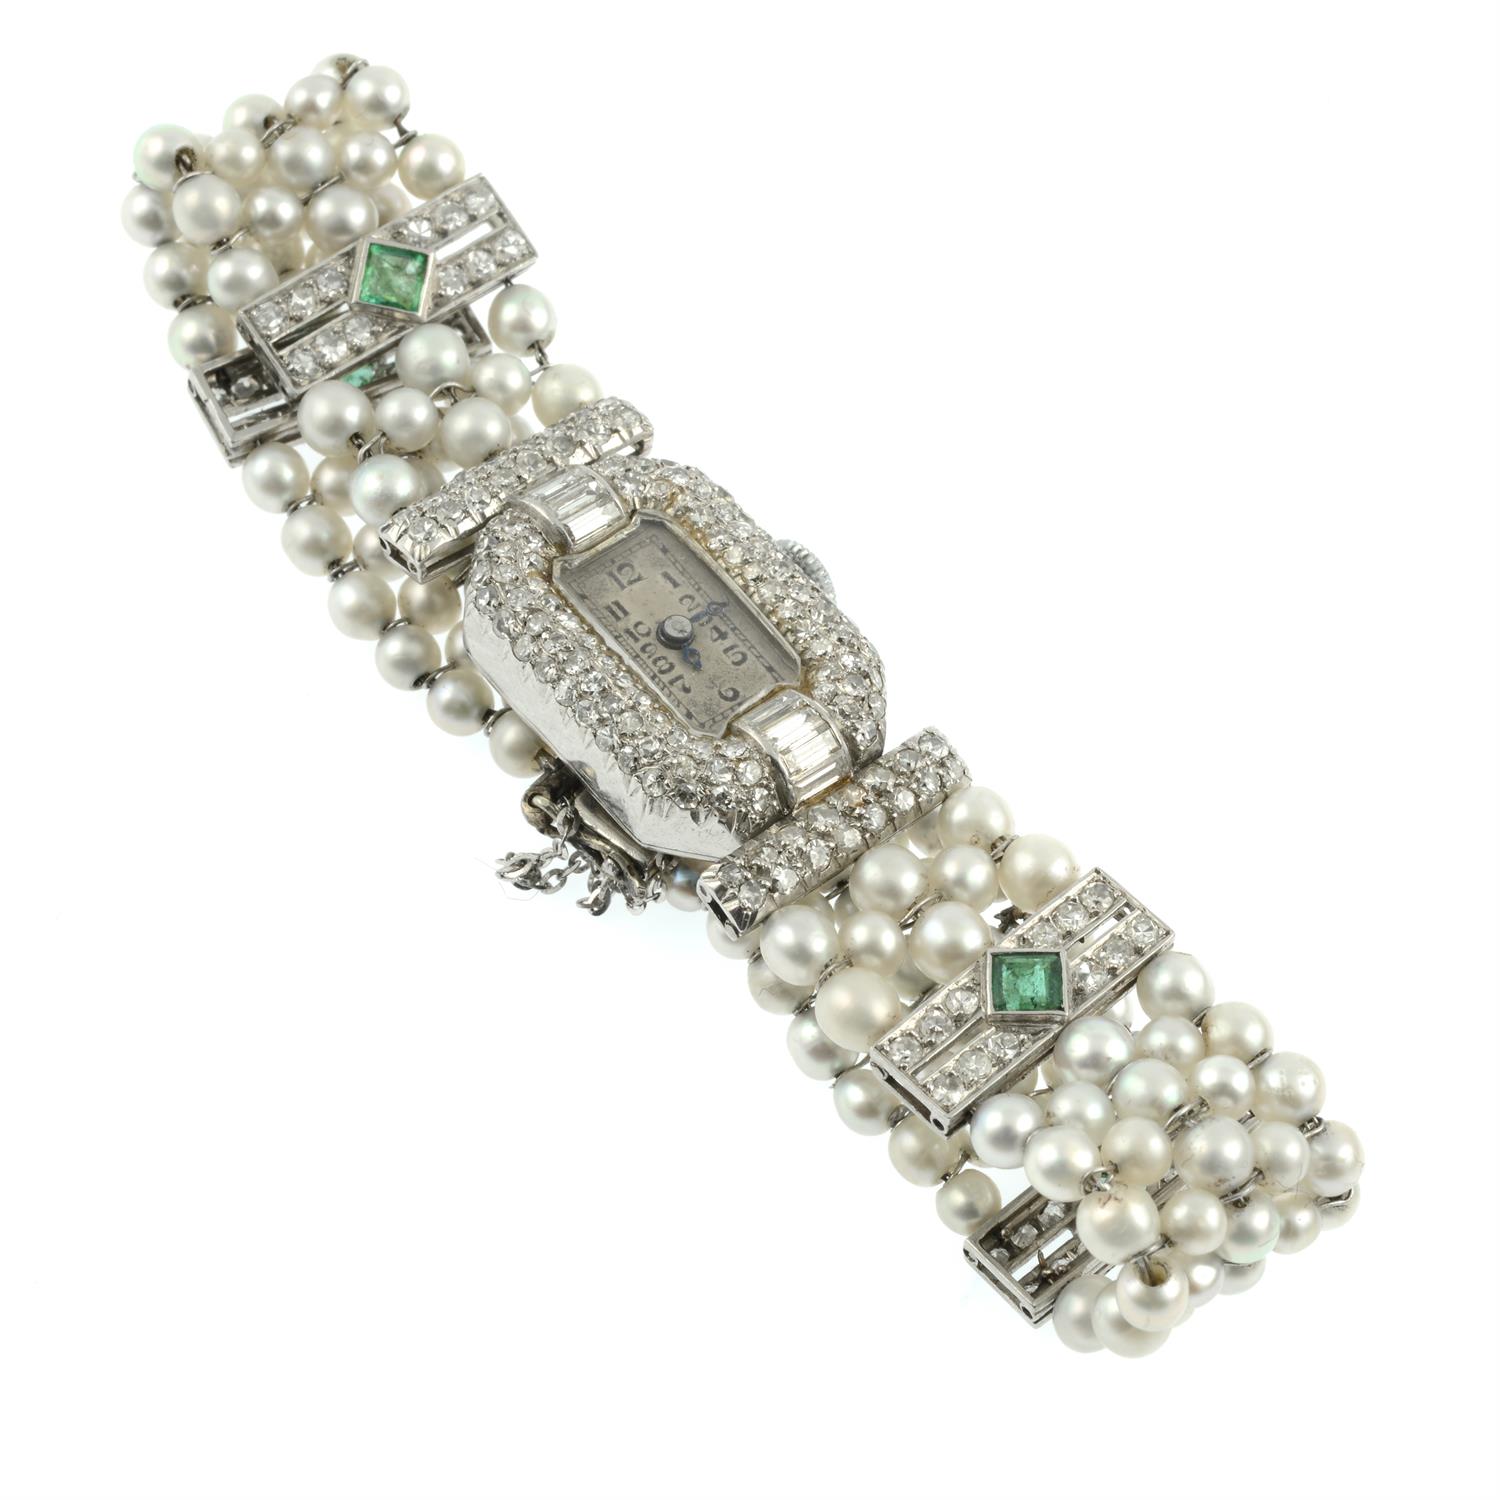 A lady's Art Deco platinum and 18ct gold vari-cut diamond, emerald and seed pearl wrist watch. - Image 3 of 5